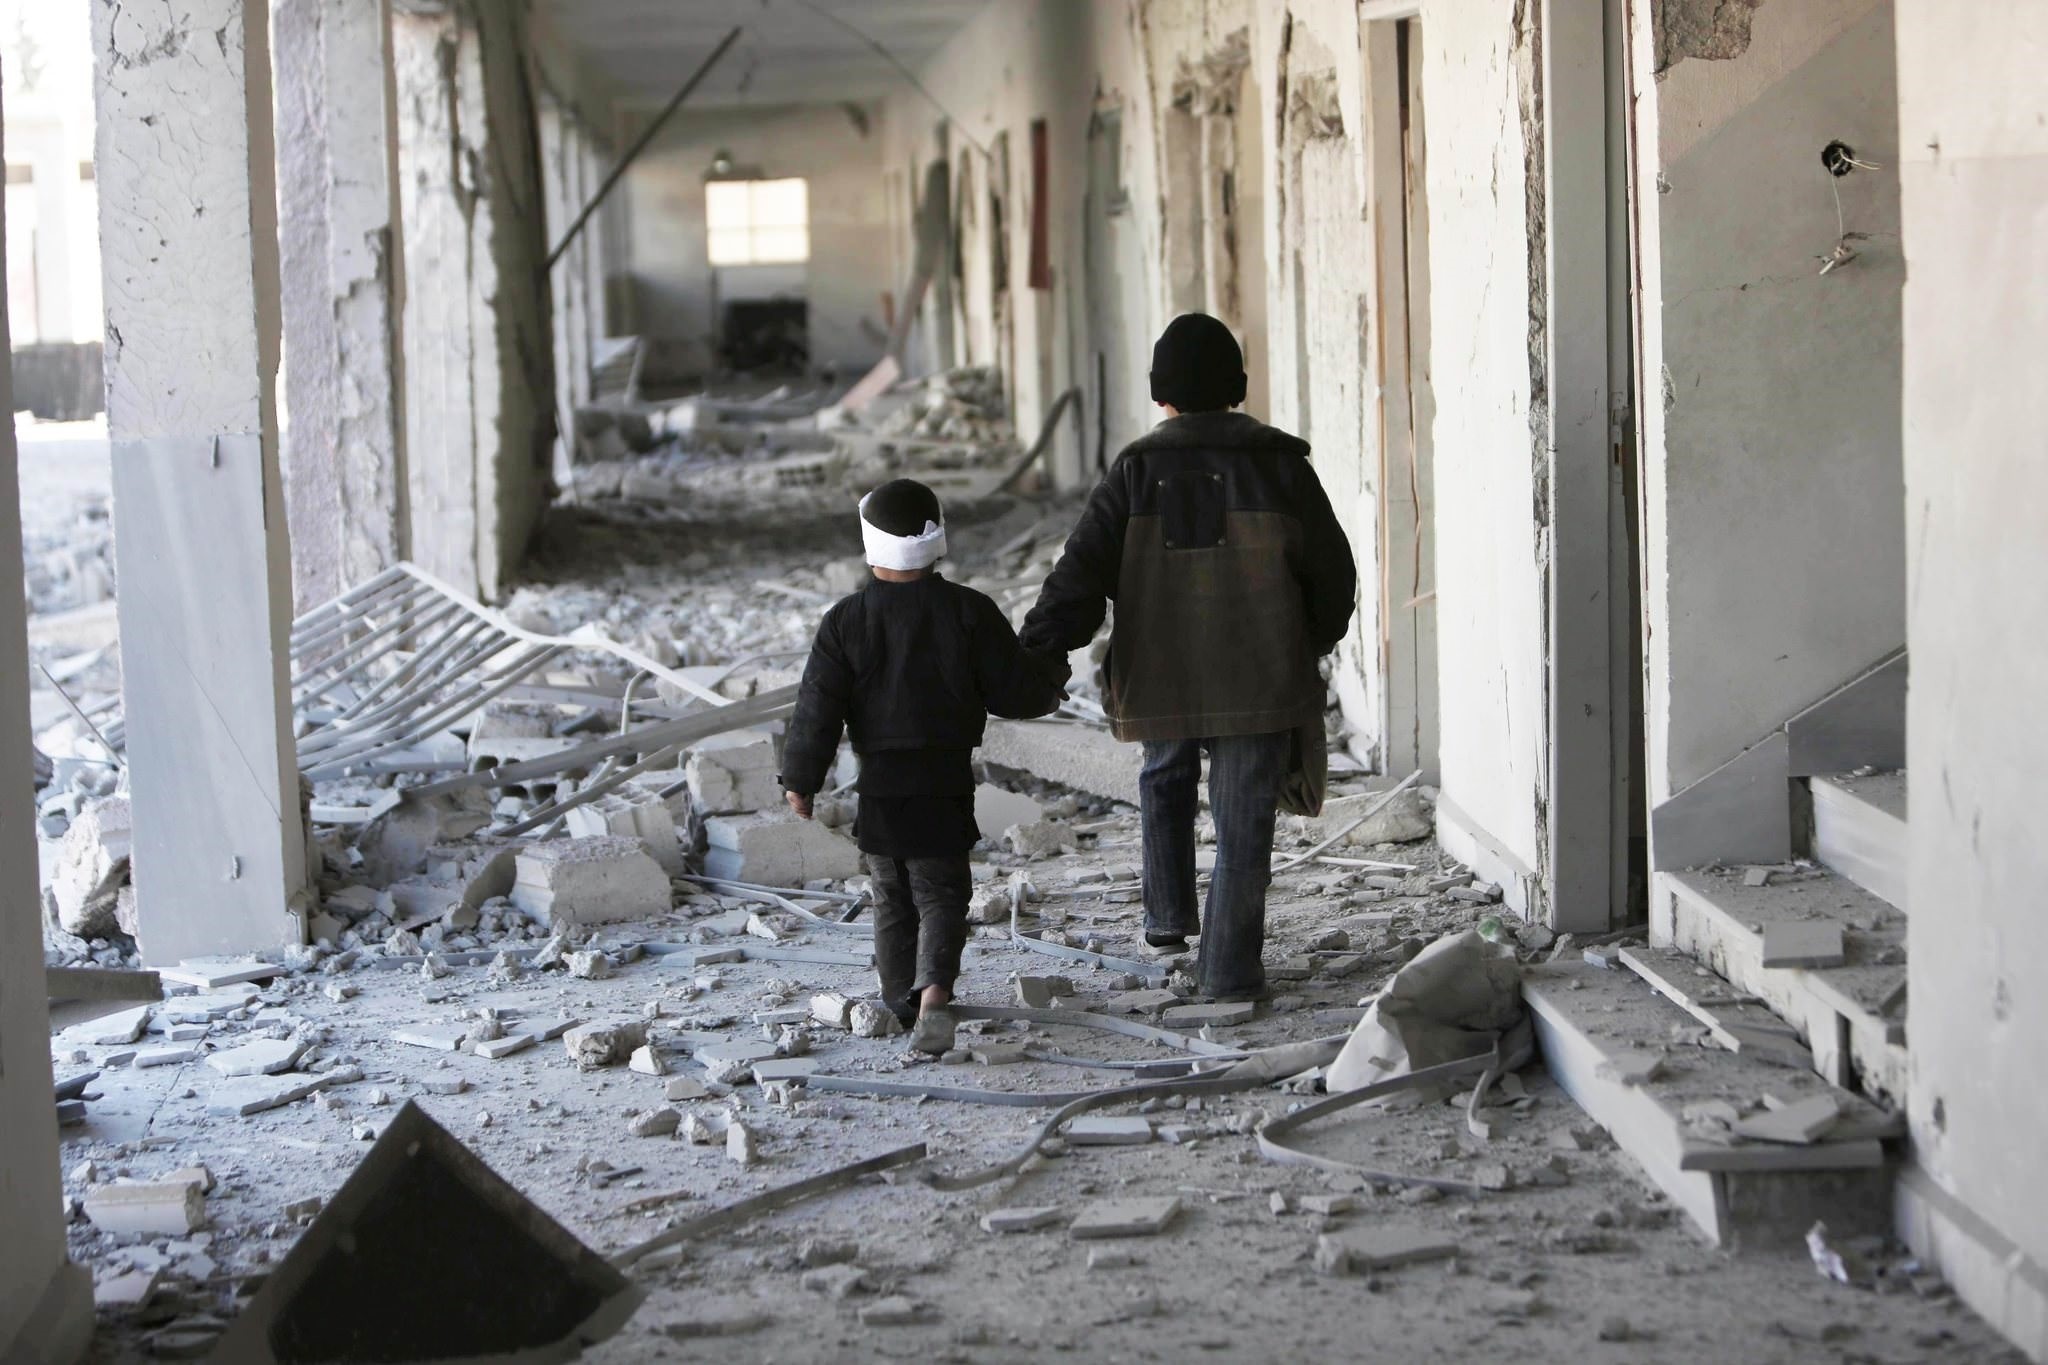 In this Nov. 25, 2015 photo provided by Save the Children, two children walk through the corridors of a destroyed school in Eastern Ghouta, Syria. (Photo by Save the Children via AP)